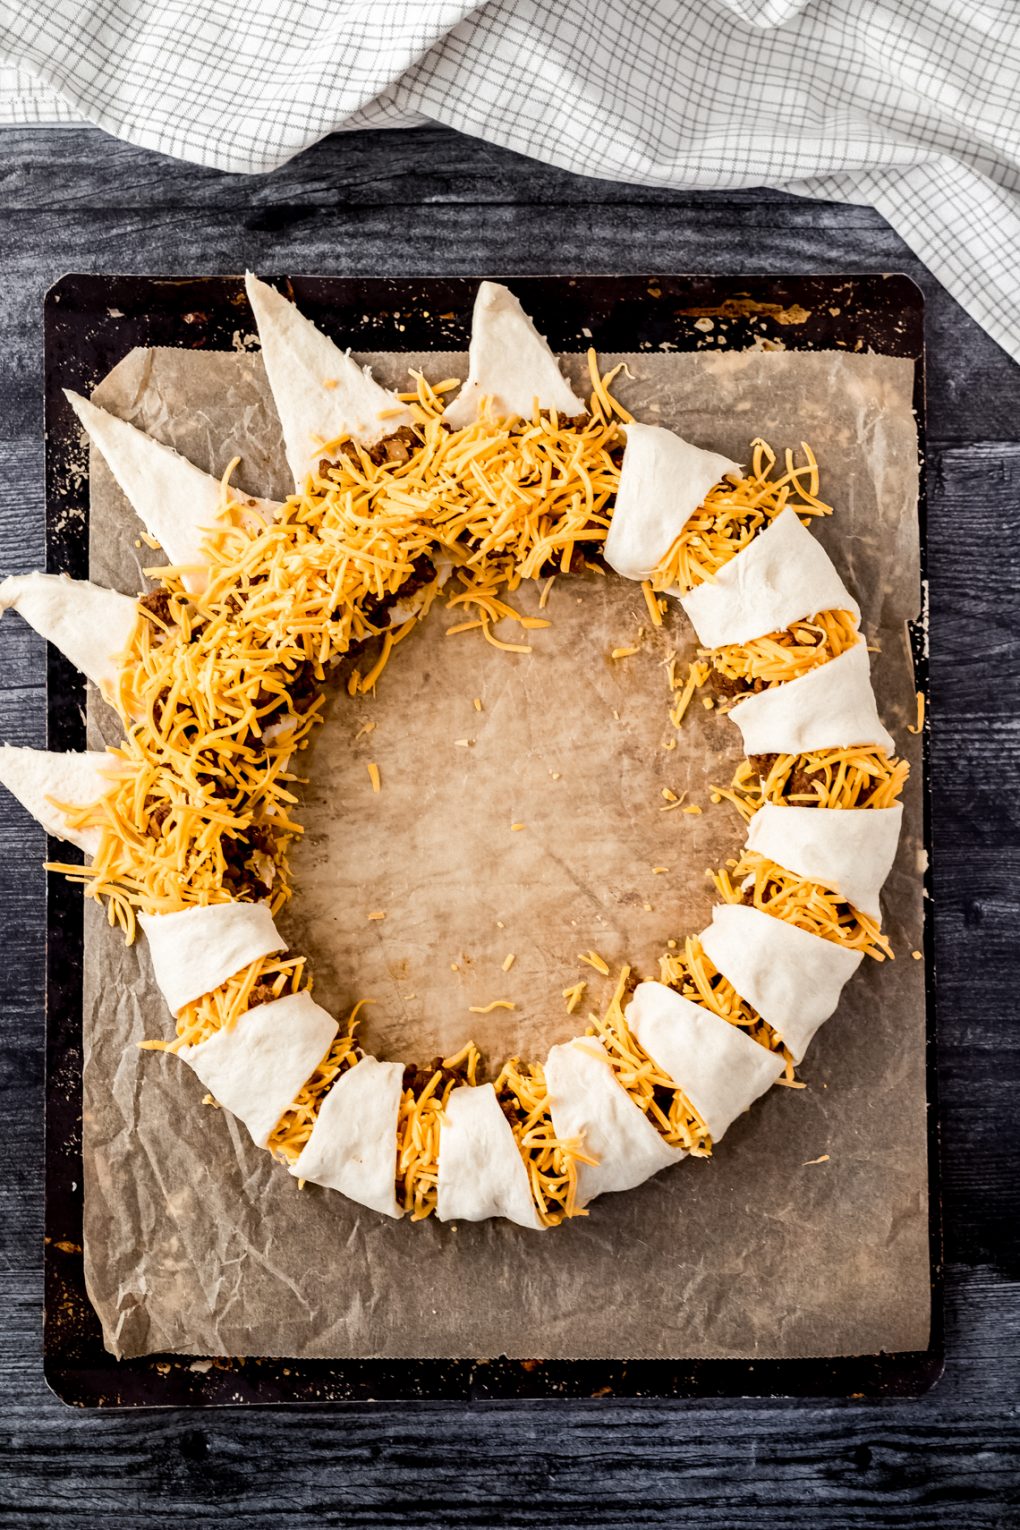 a venison taco ring being assembled